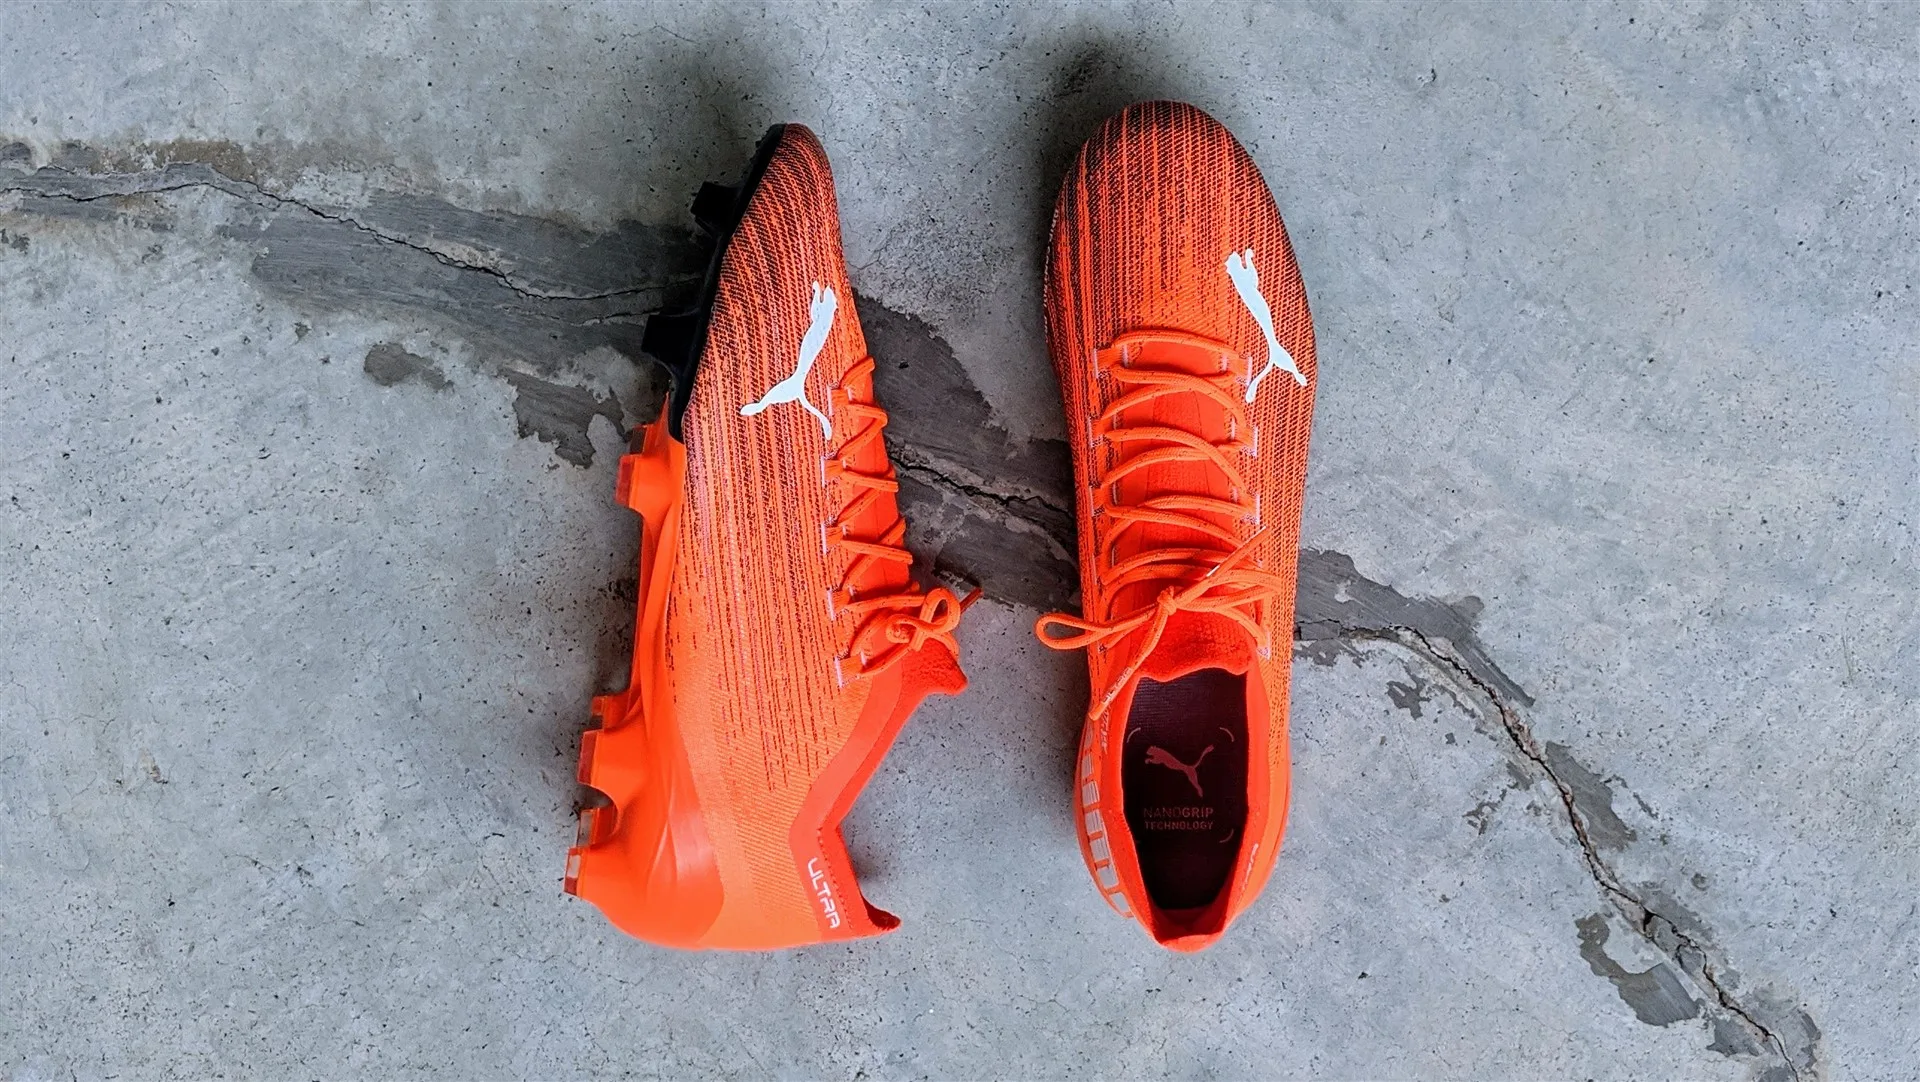 Puma Ultra 1.1 football boot soccer cleat review